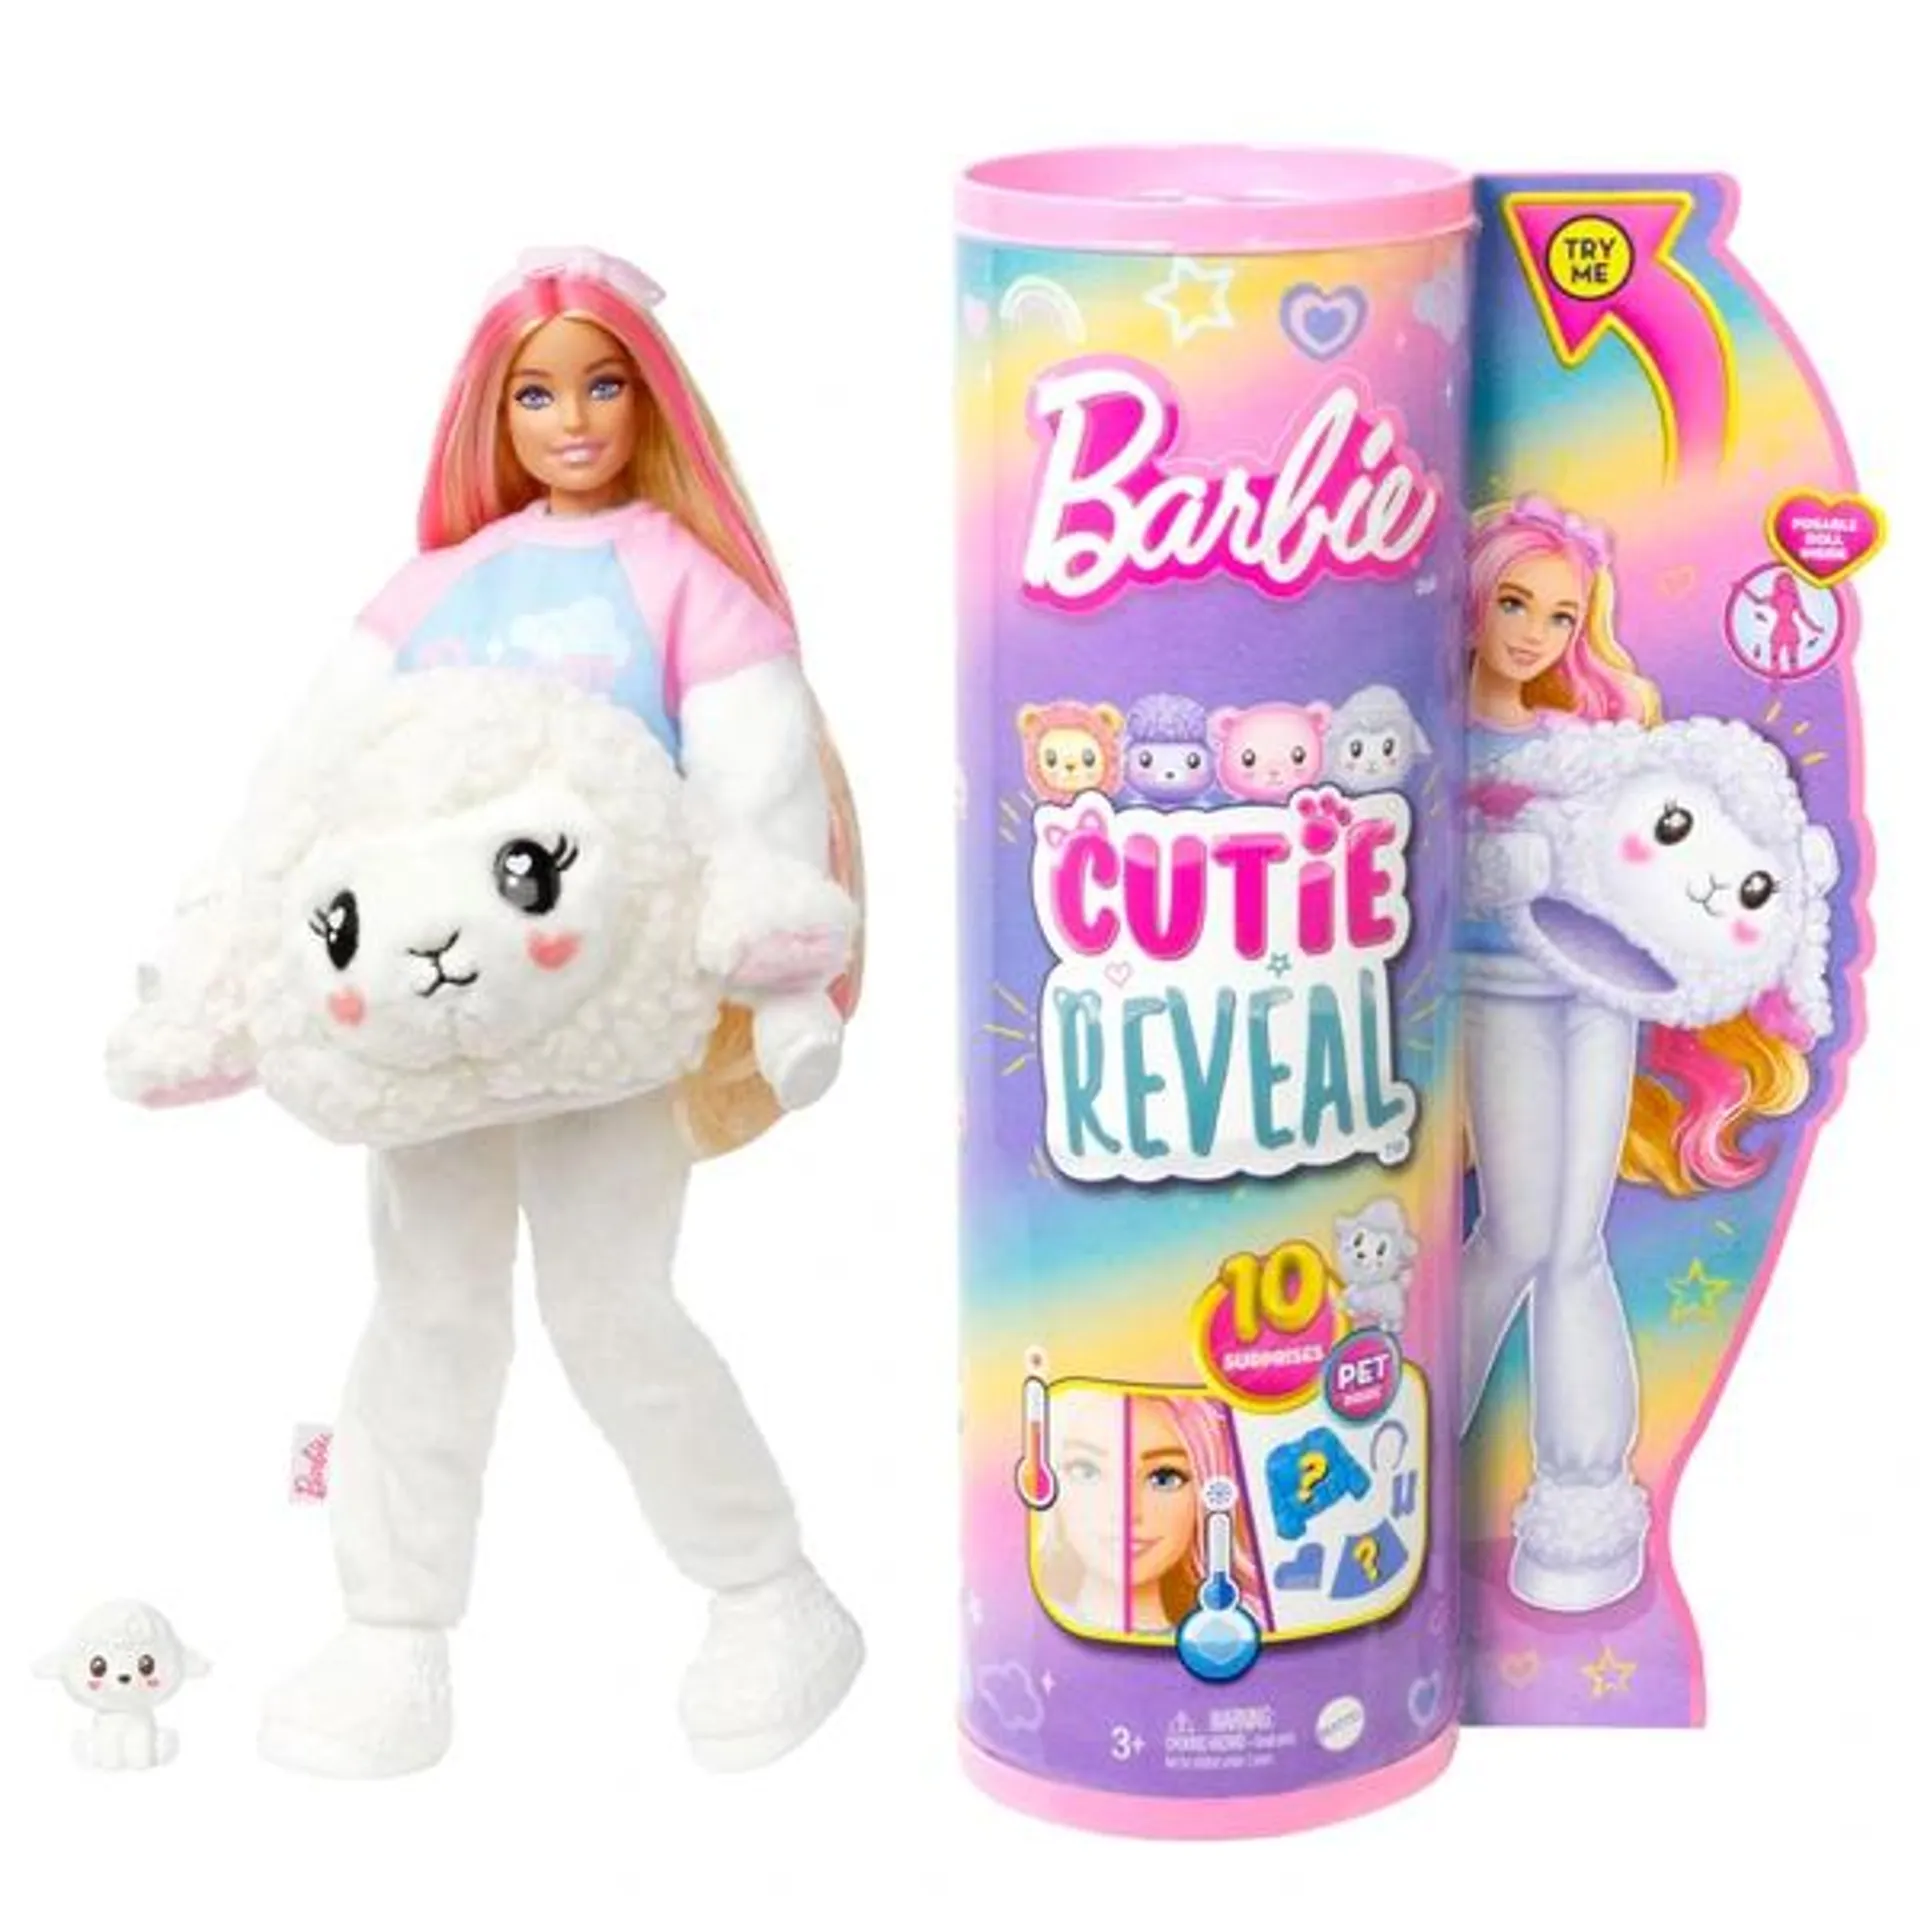 Barbie Cutie Reveal Cozy Cute Tees Doll with Lamb Plush Costume and 10 Surprises